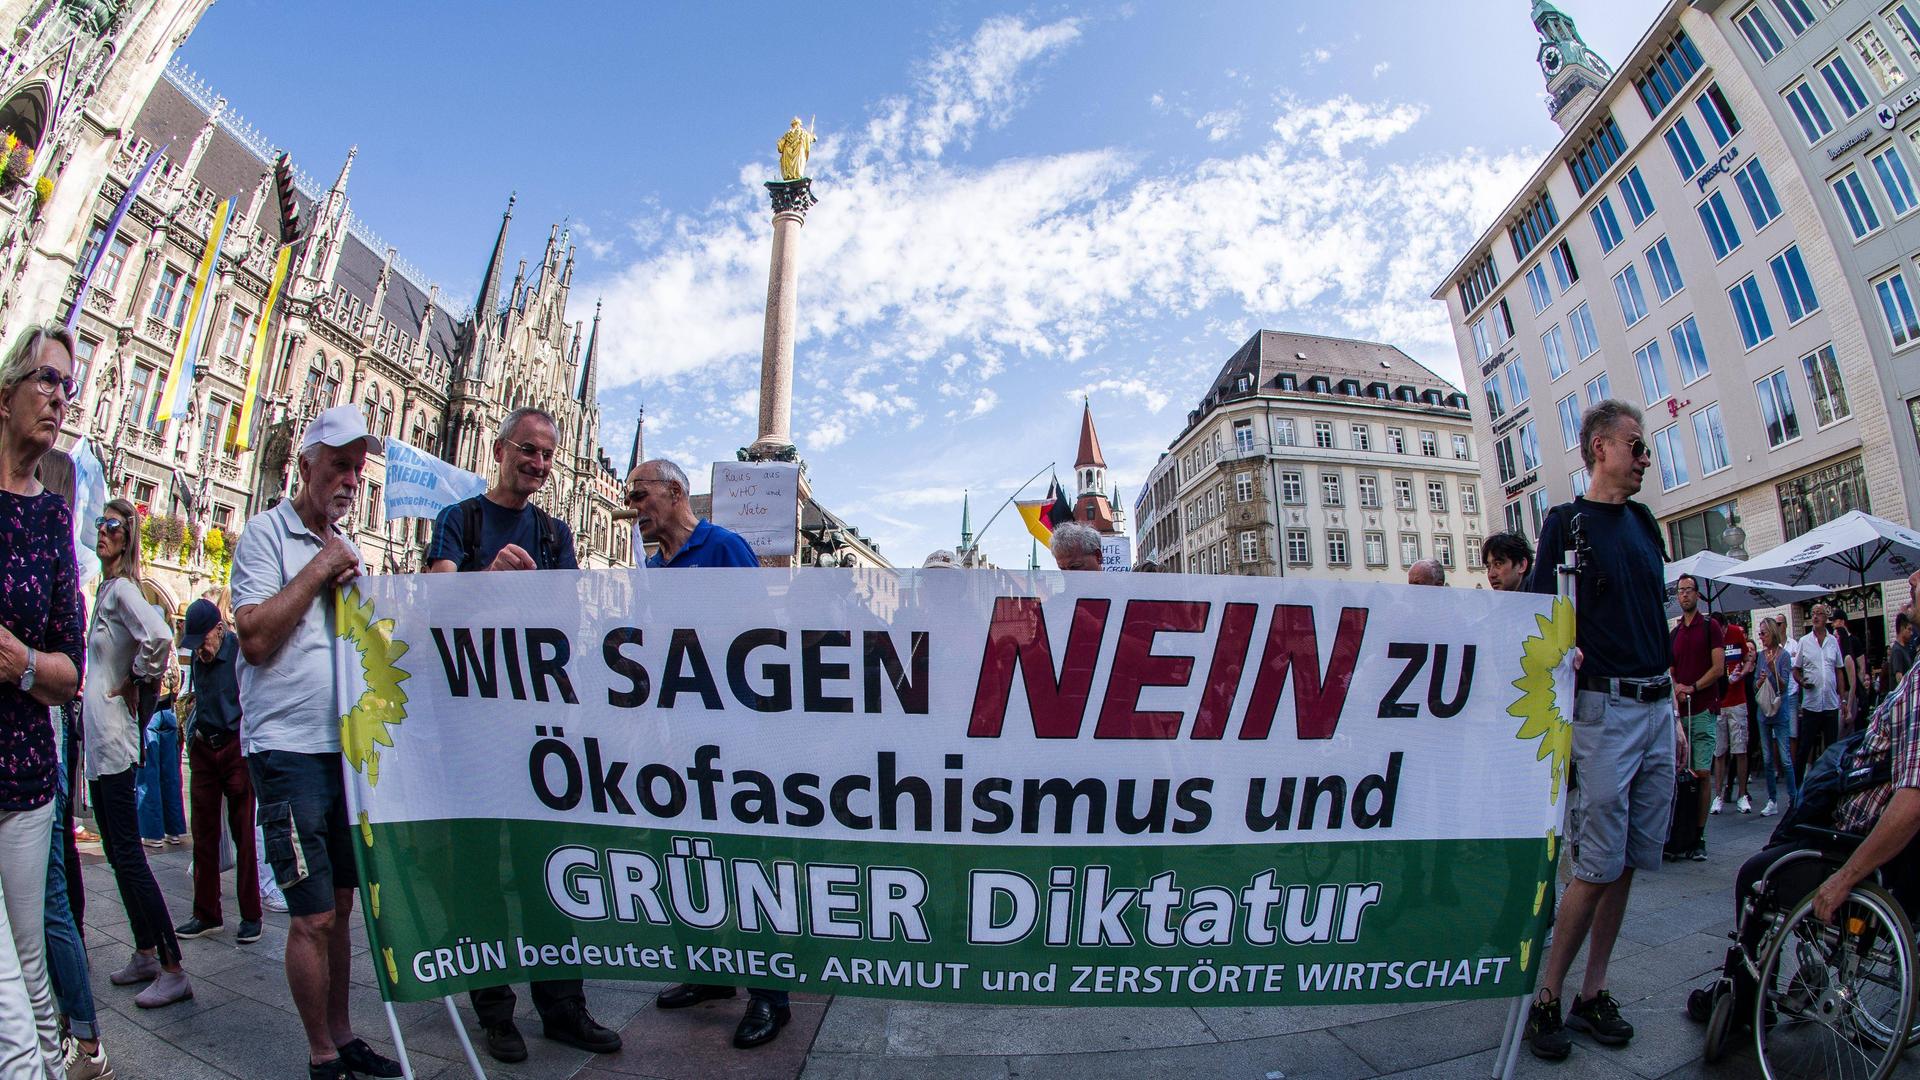 October 3, 2023, Munich, Bavaria, Germany: On the Day of German Unity (Tag der Deutschen Einheit), the pro-Russia "München Steht Auf" conspiracy extremist group and their associates organized a protest. The MSA group is a combination of Pegida, far- and extreme-right groups, QAnons, Reichsbürger (sovereign citizens), and other anti-democratic orphan groups.